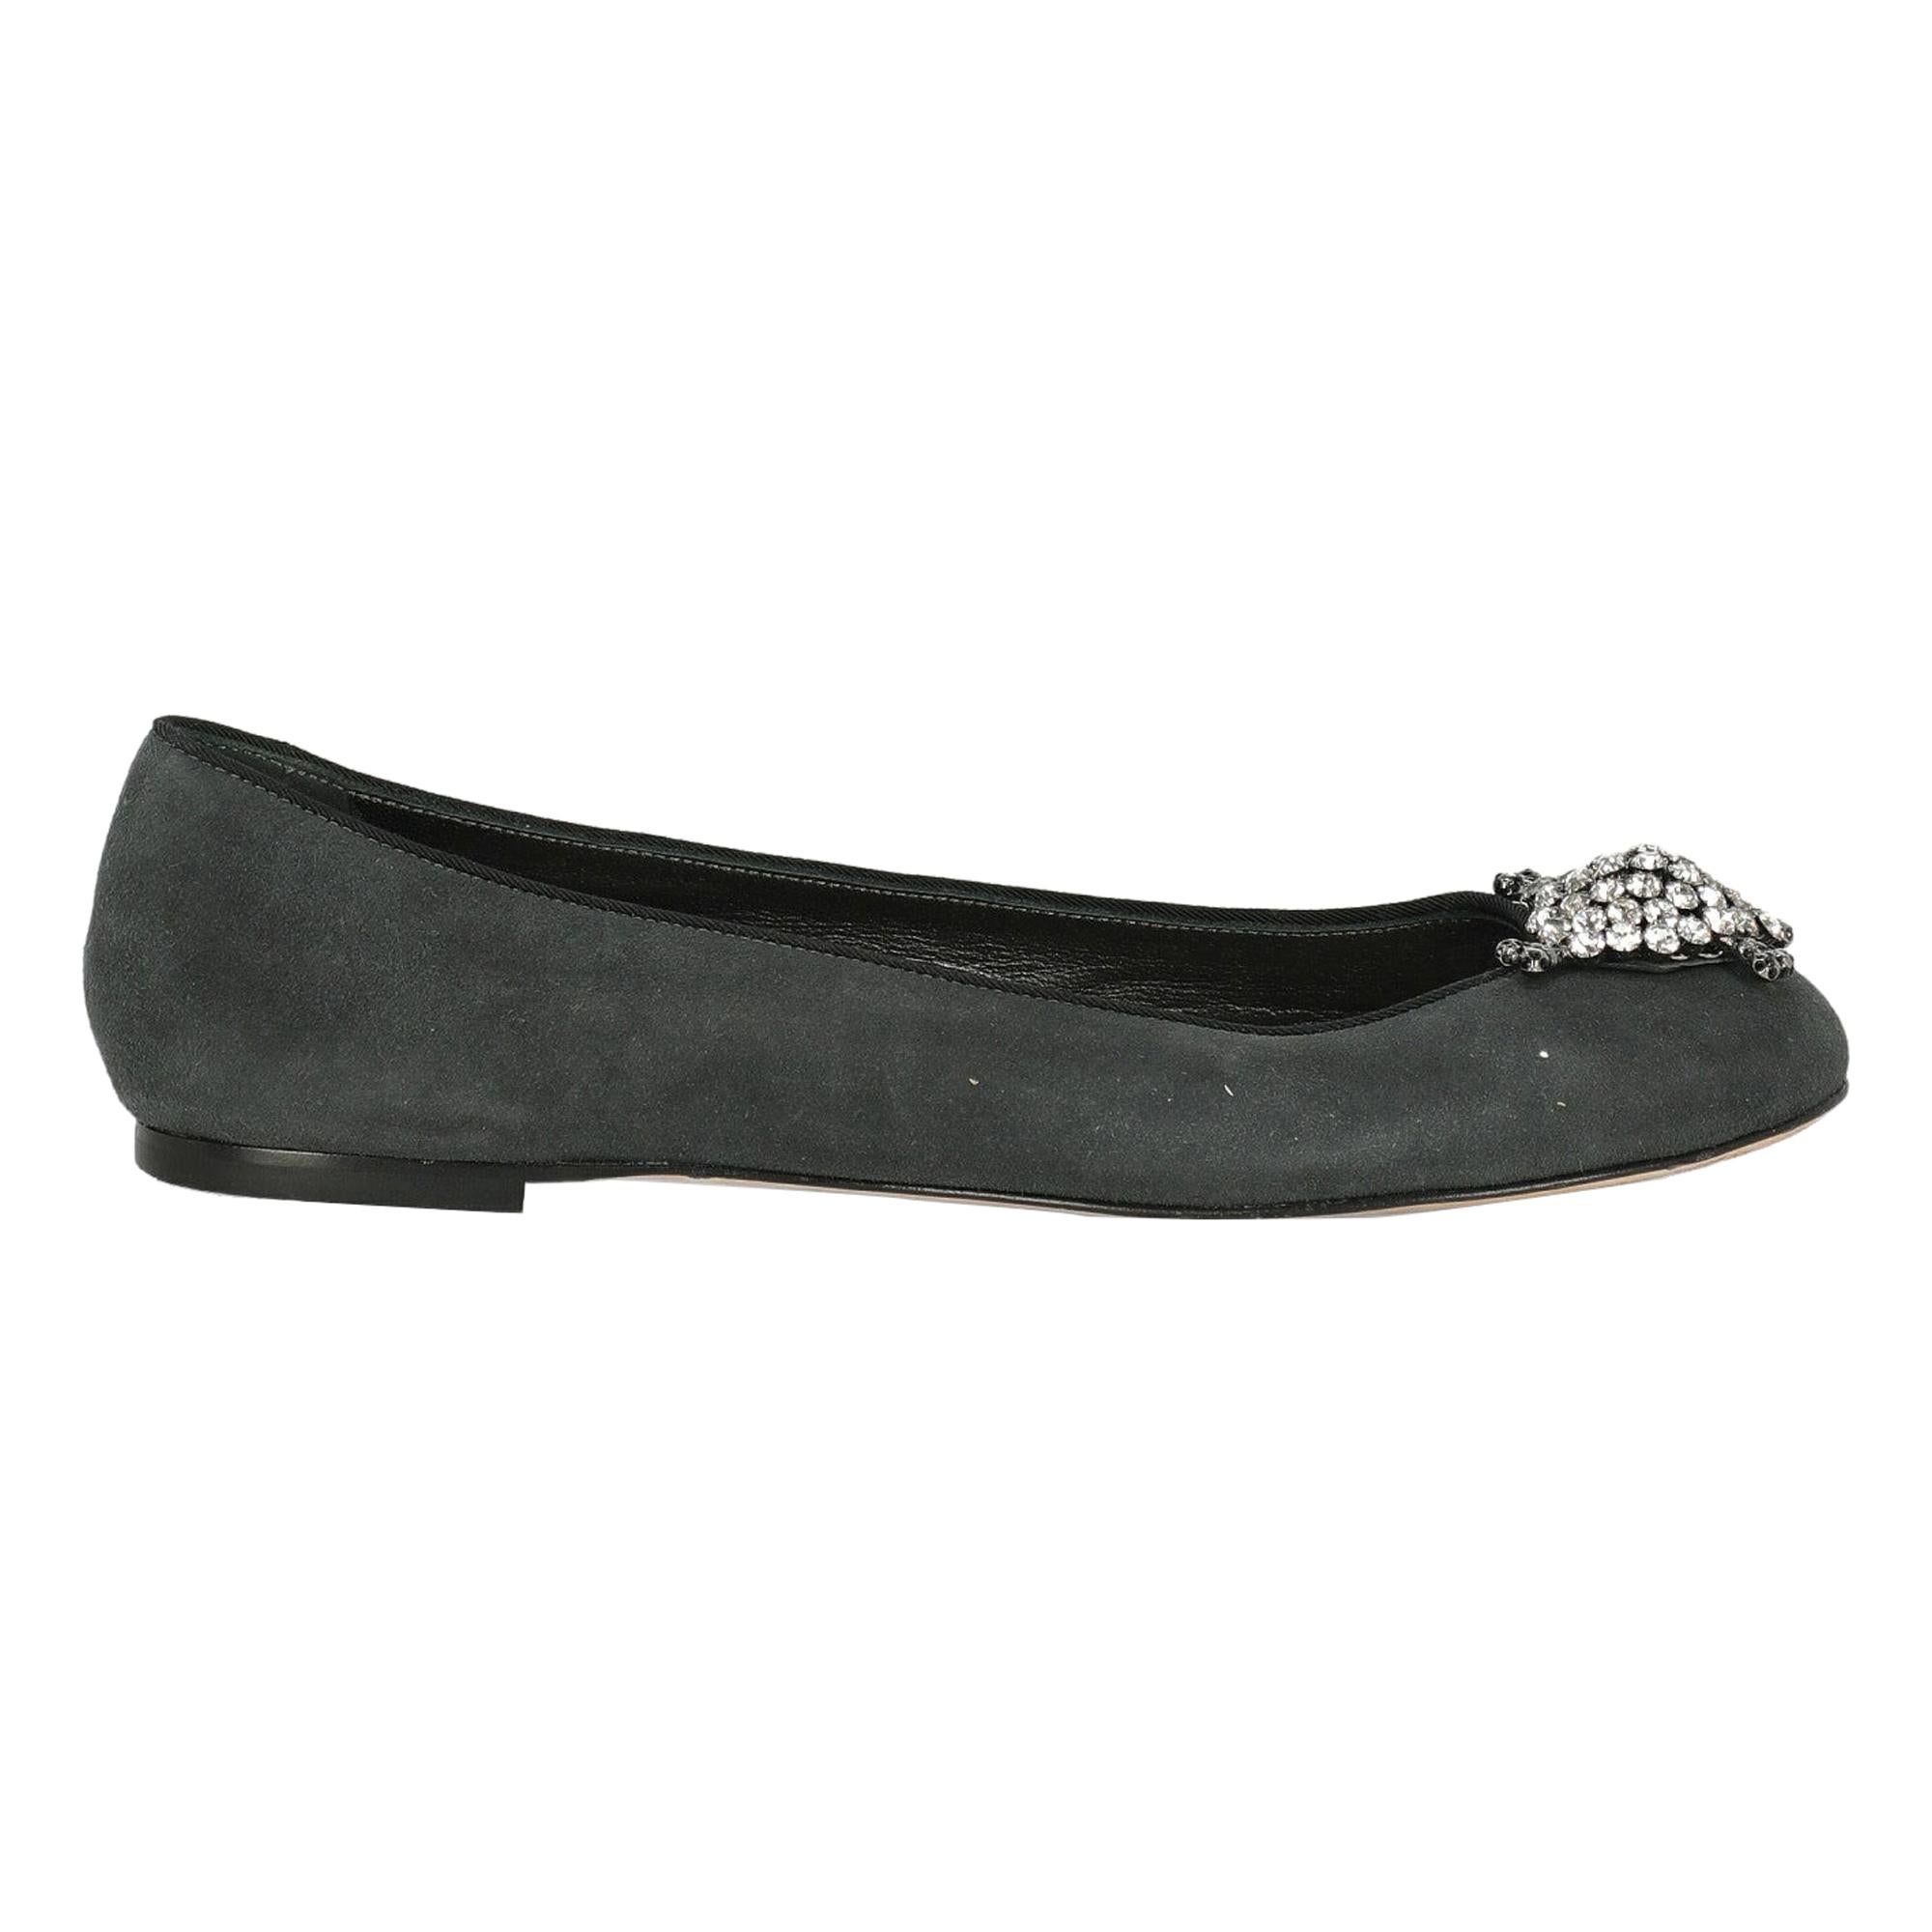 Giuseppe Zanotti Woman Ballet flats Anthracite Leather IT 38.5 For Sale